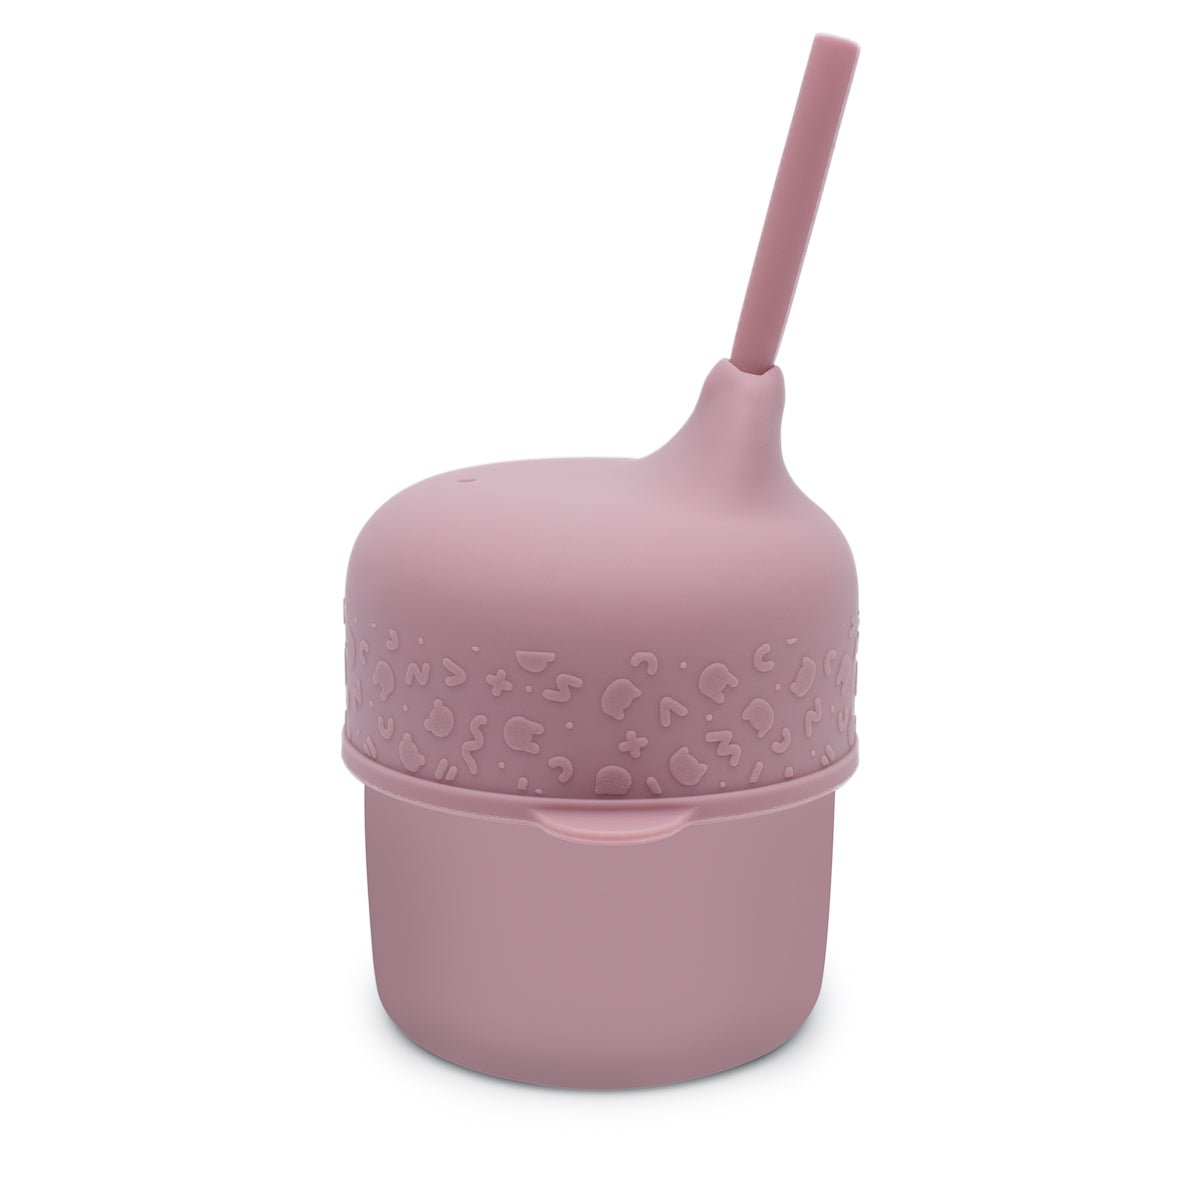 Sippie Cup Set in Dusty Rose with Straw